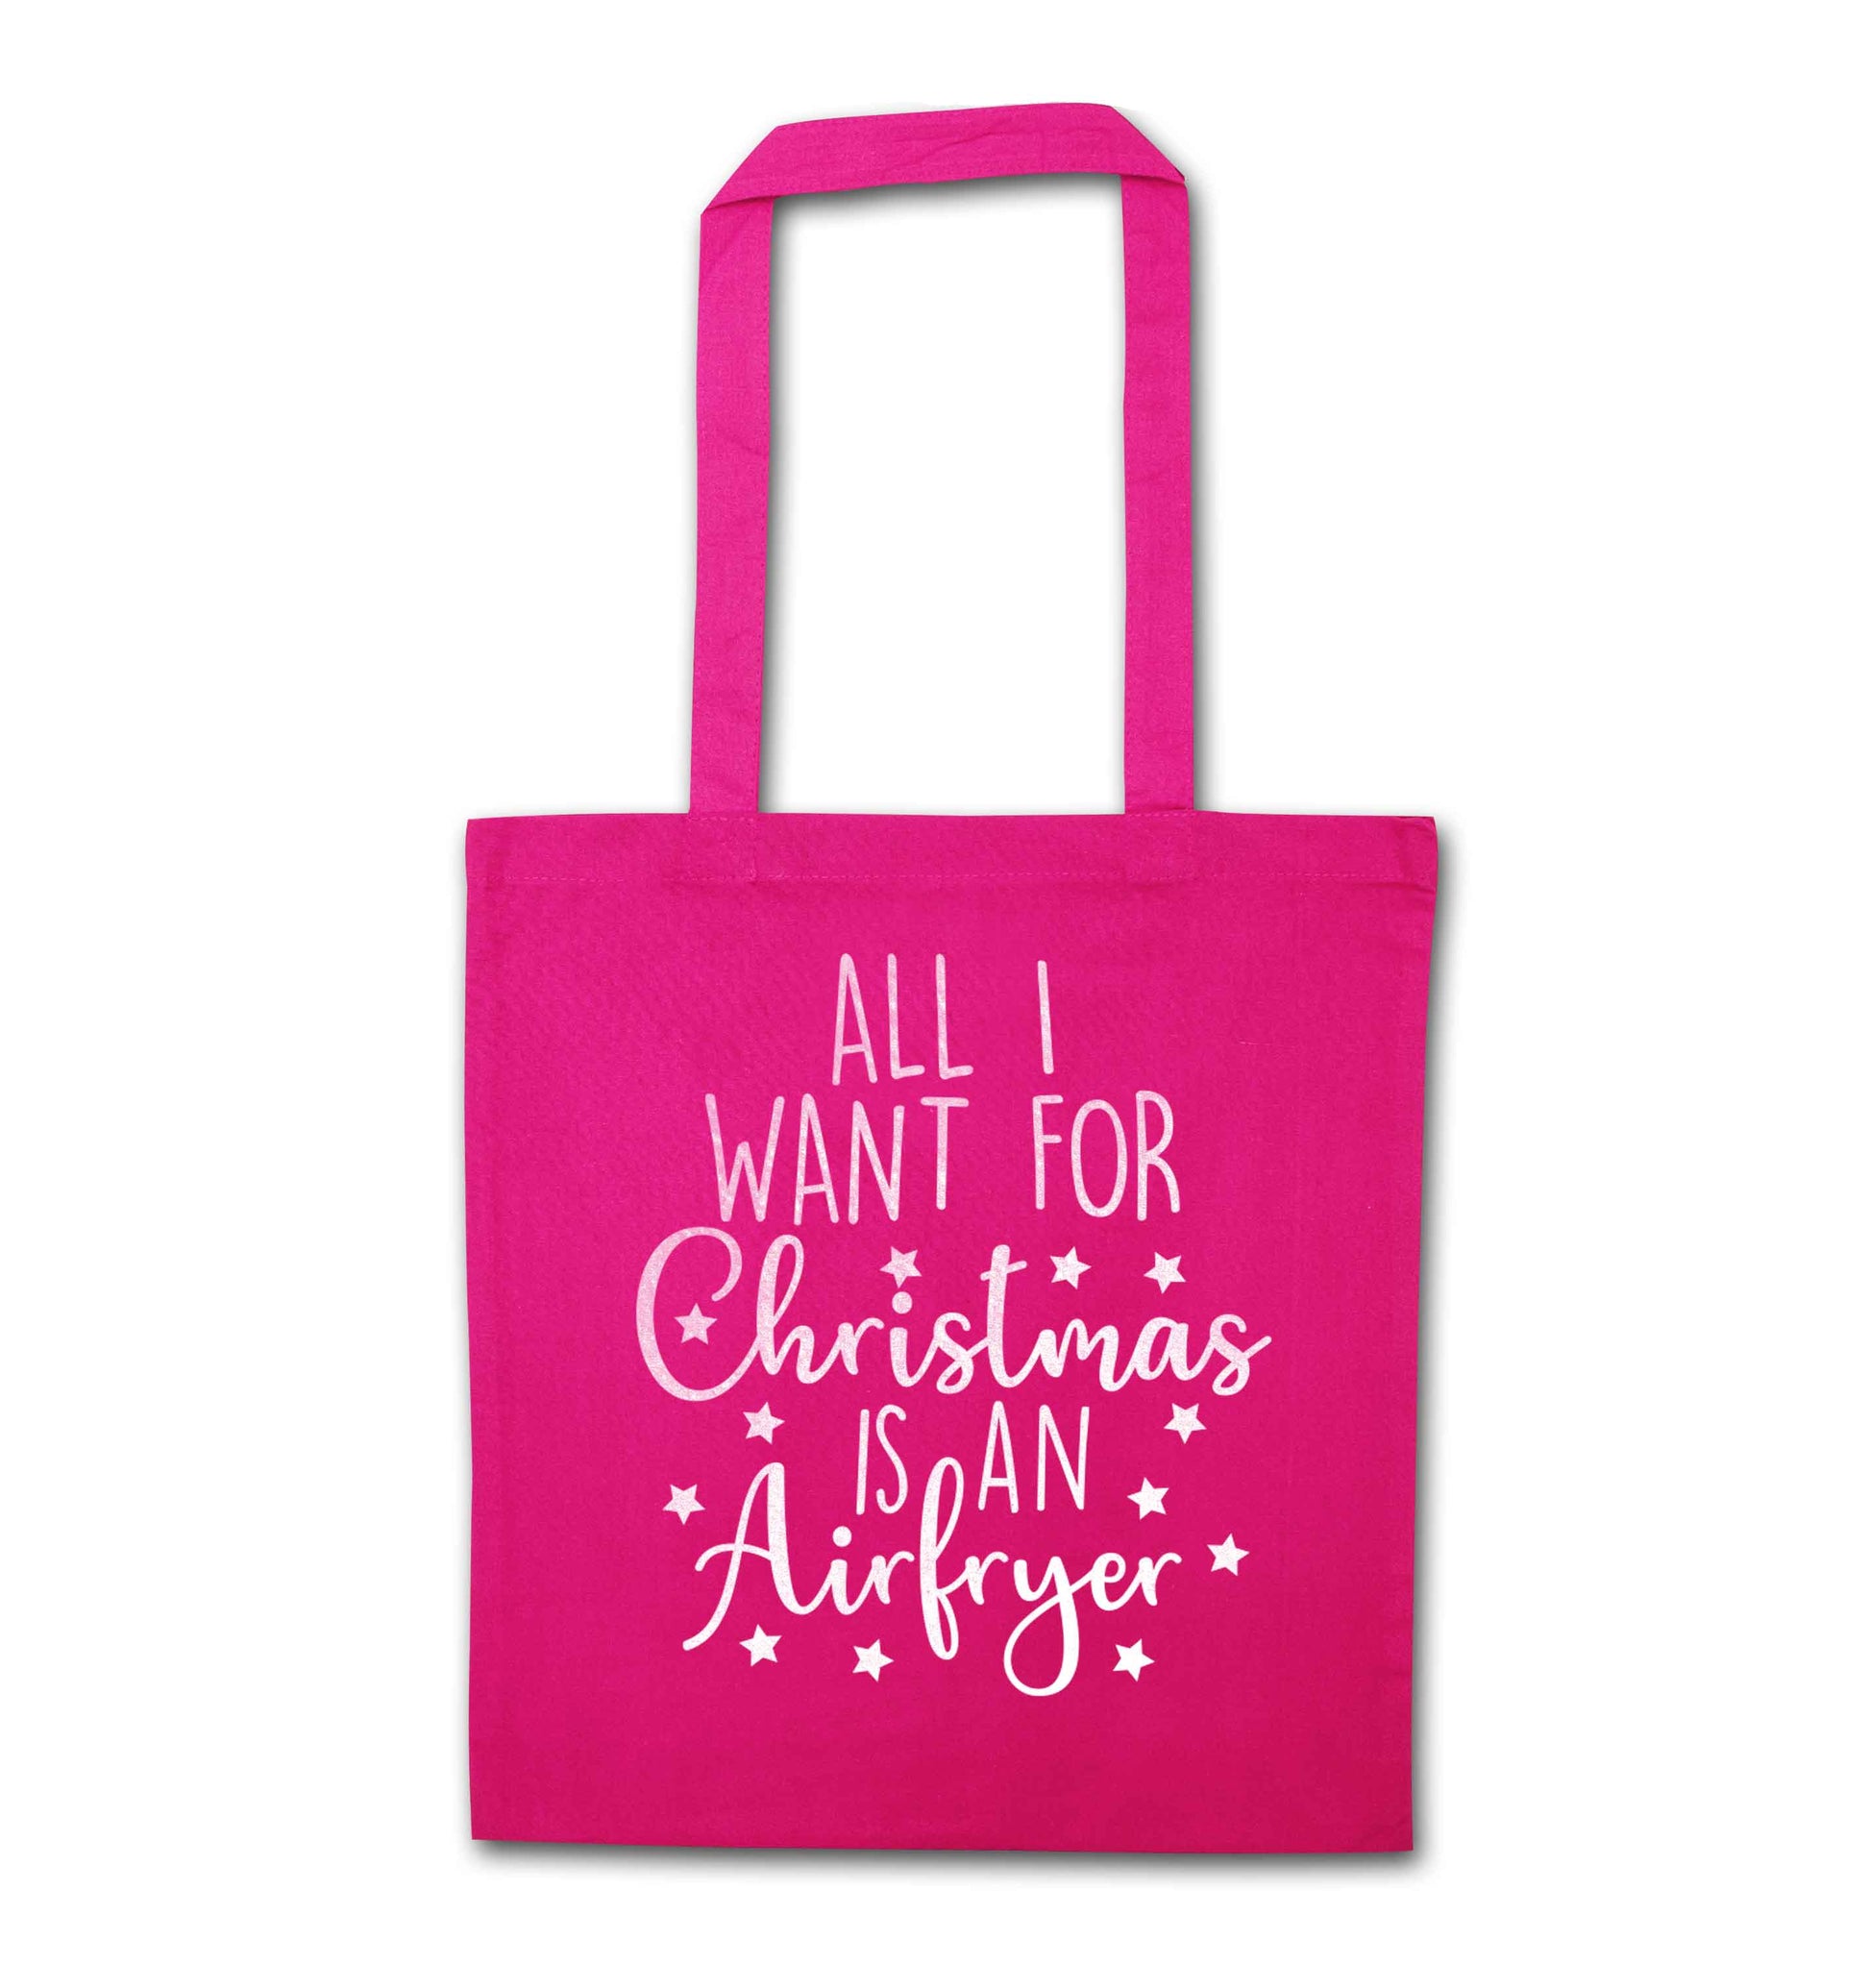 All I want for Christmas is an airfryerpink tote bag